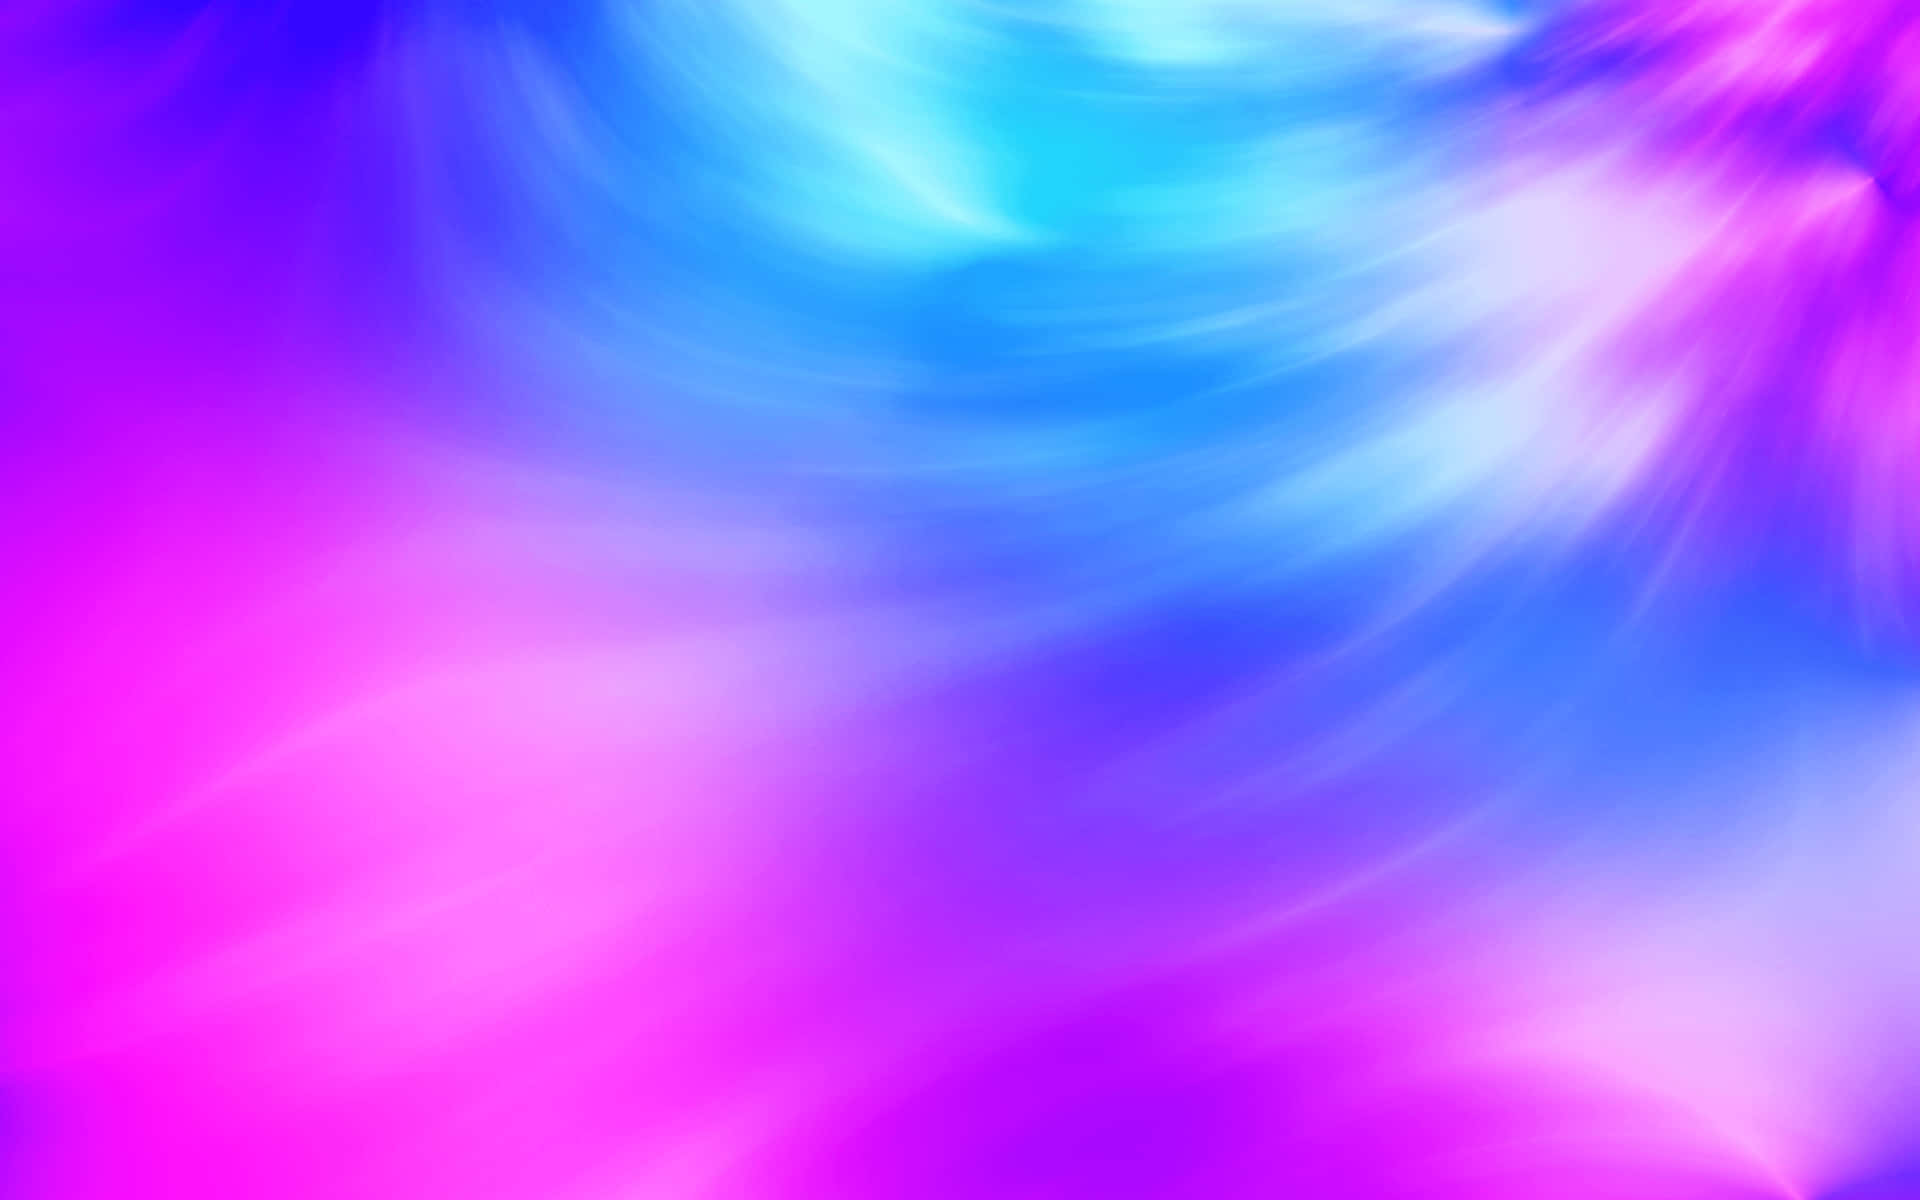 A vibrant purple and pink background with an abstract design